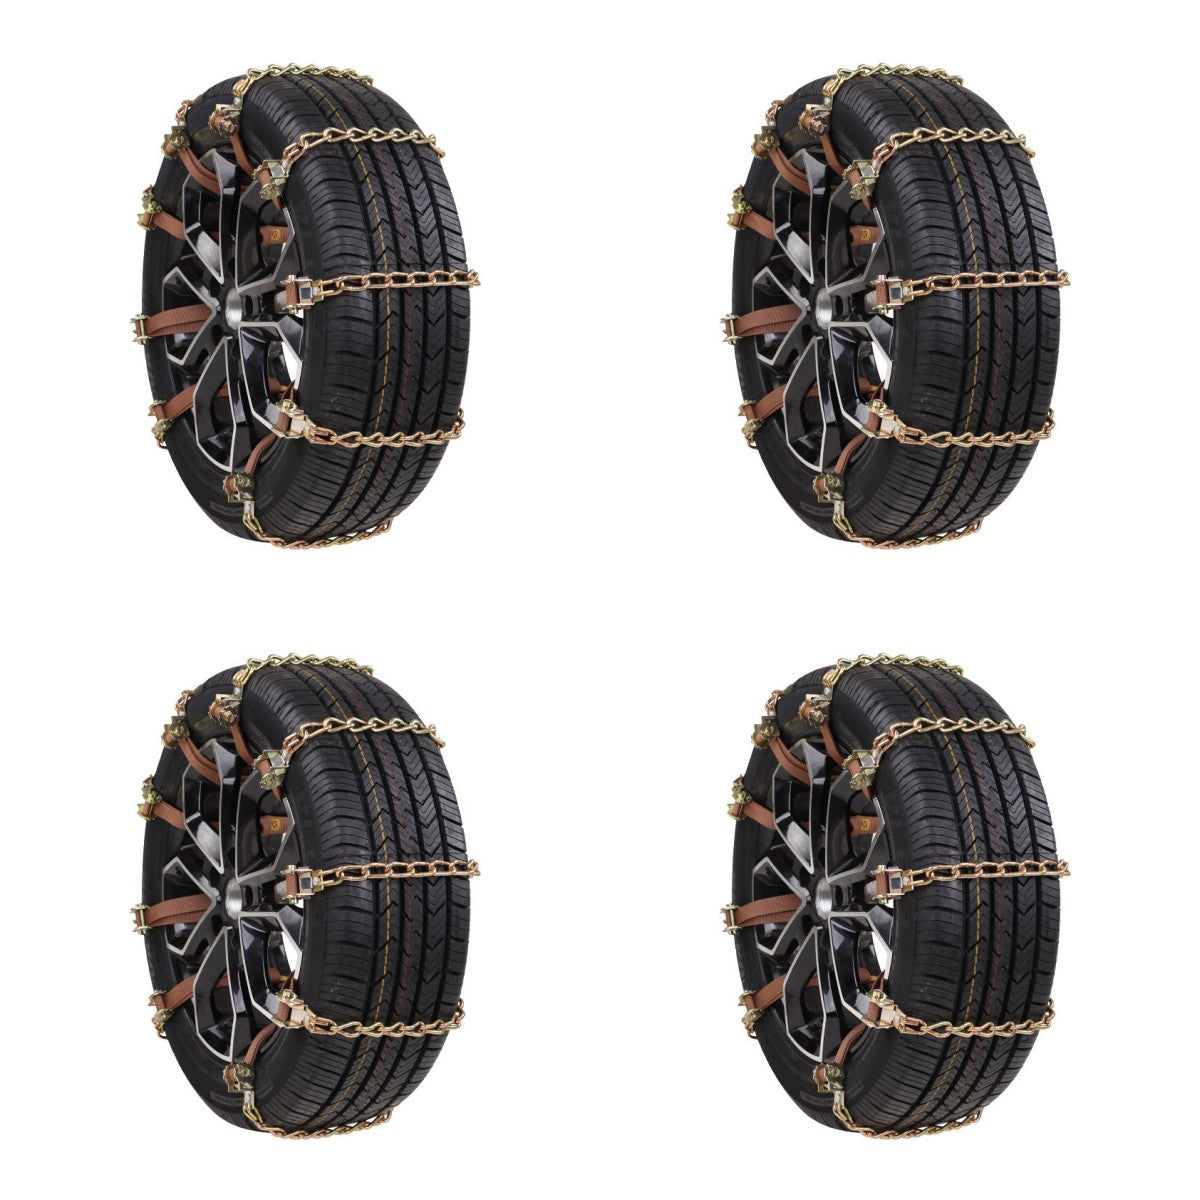 ArcticGrip Snow Chains - Your Path to Safety